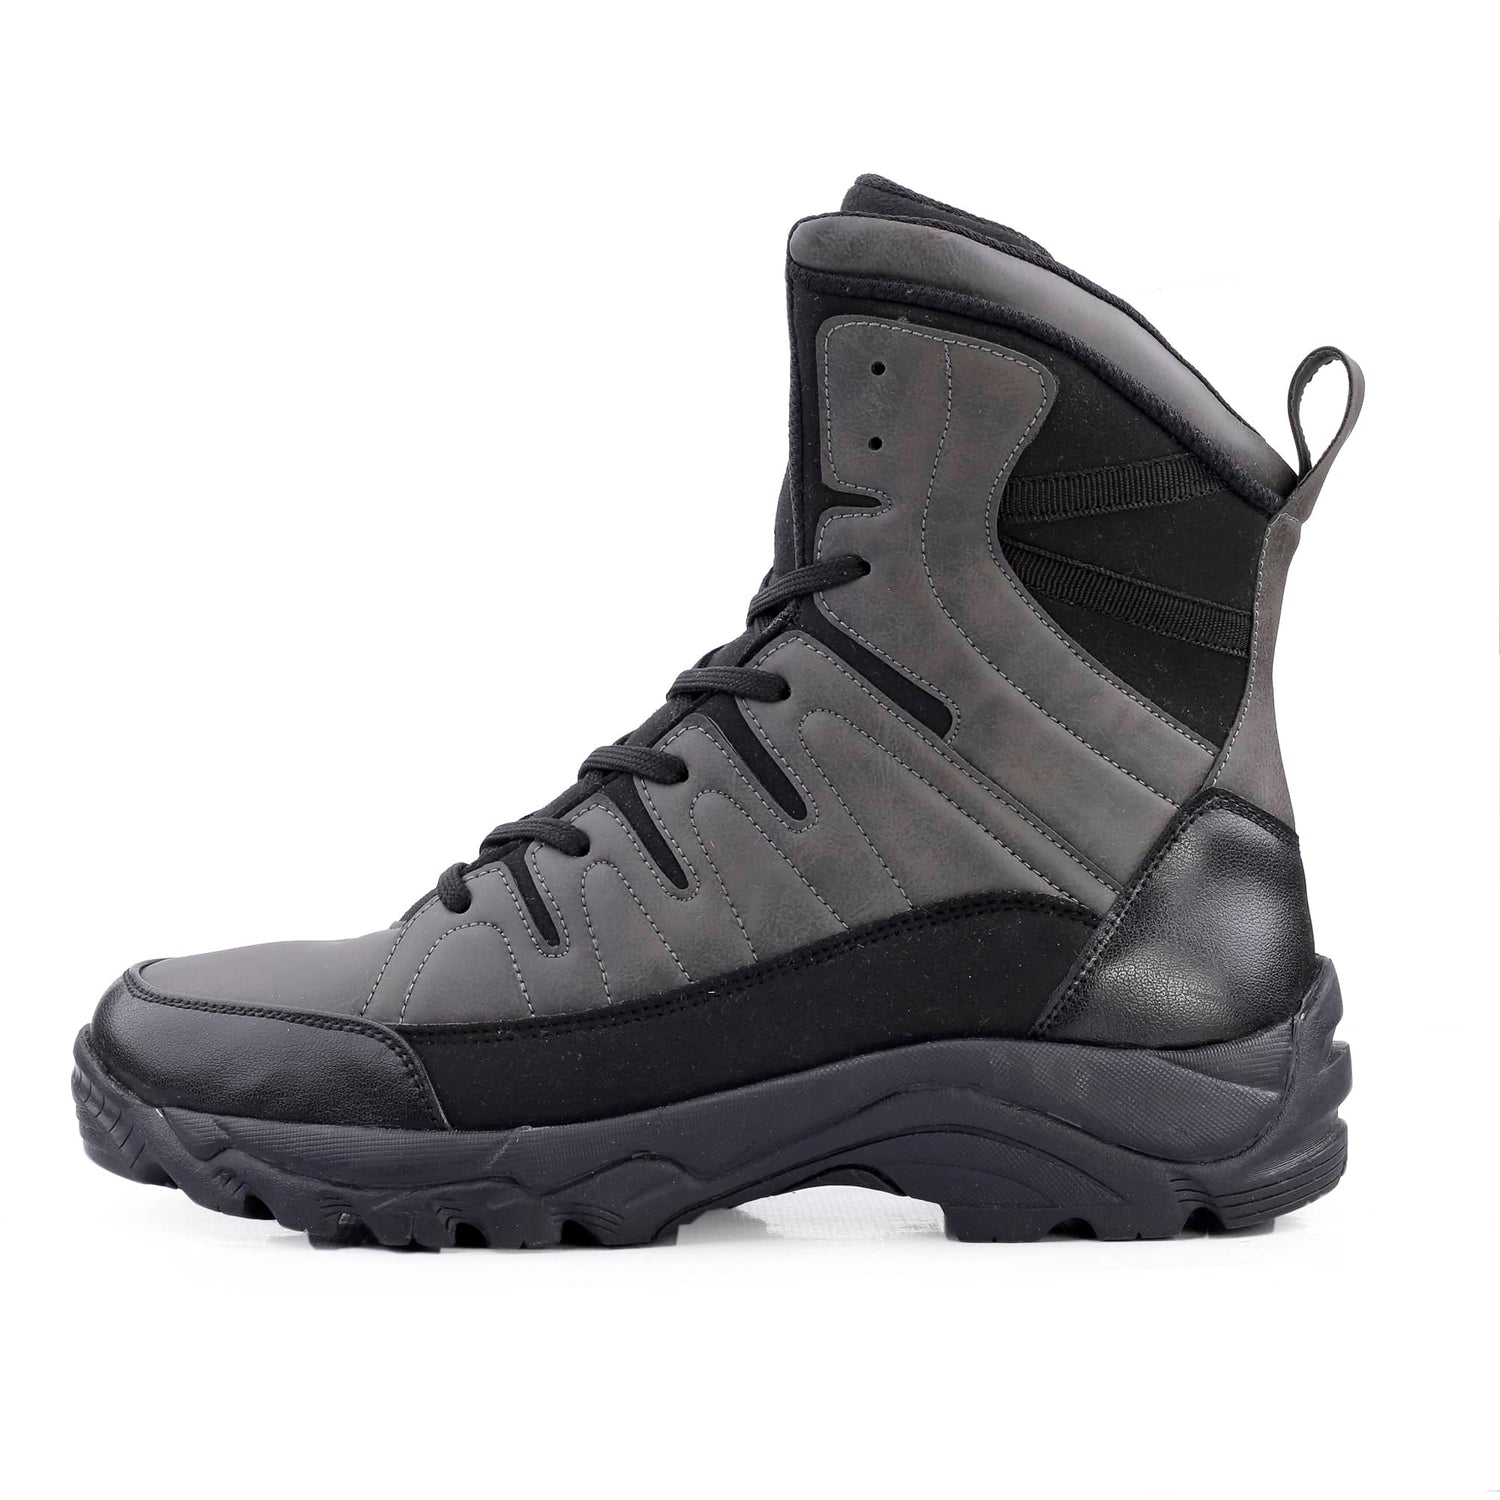 Waterproof Snow Boots | FLAME 7-Eye Moto Inspired Boots | Bacca Bucci